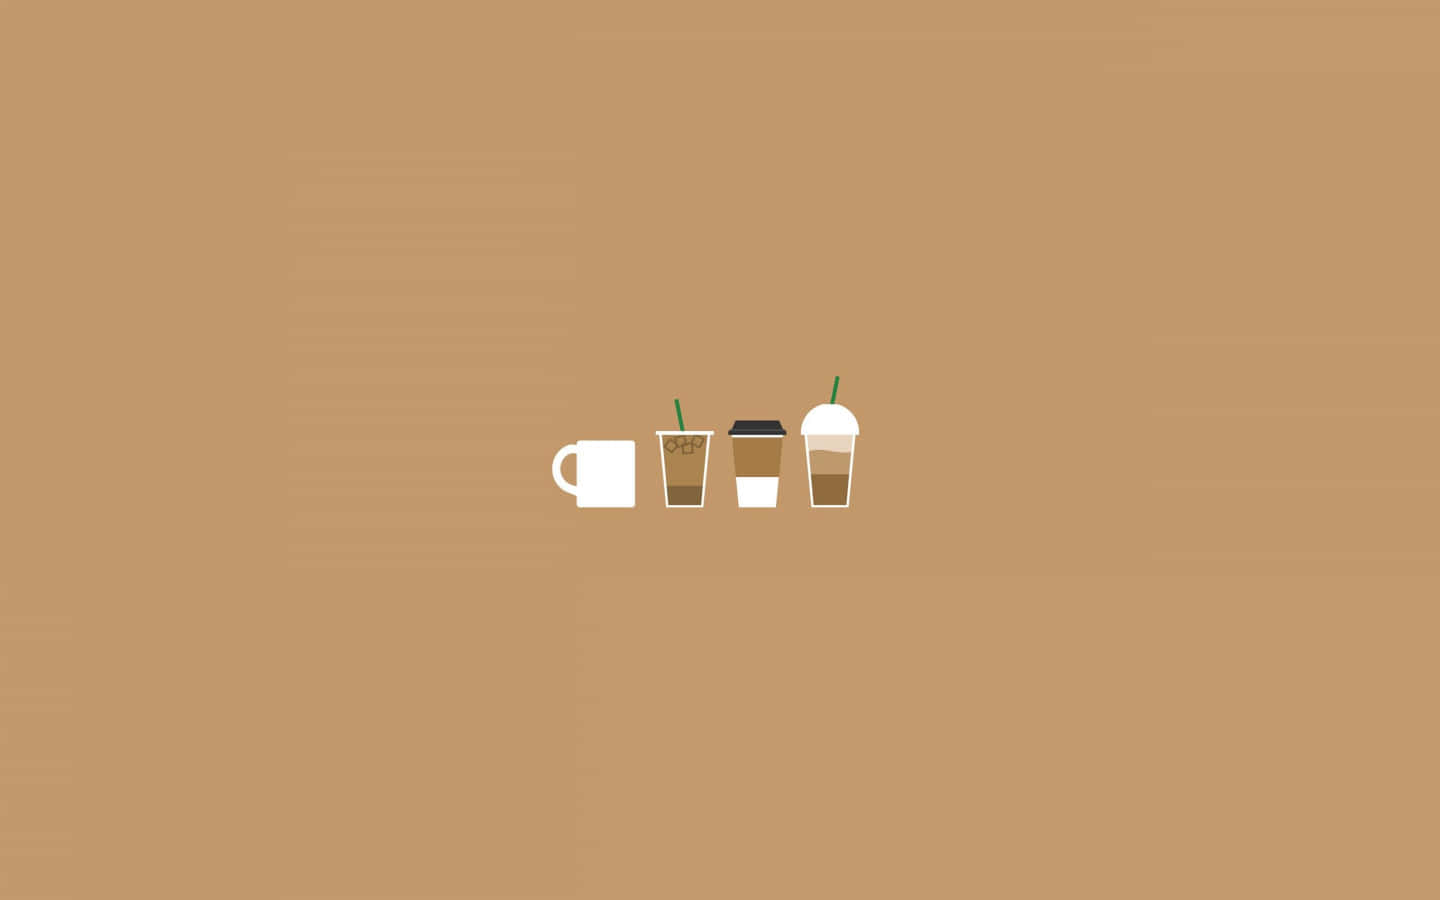 Get your Cute Coffee Fix Here Wallpaper